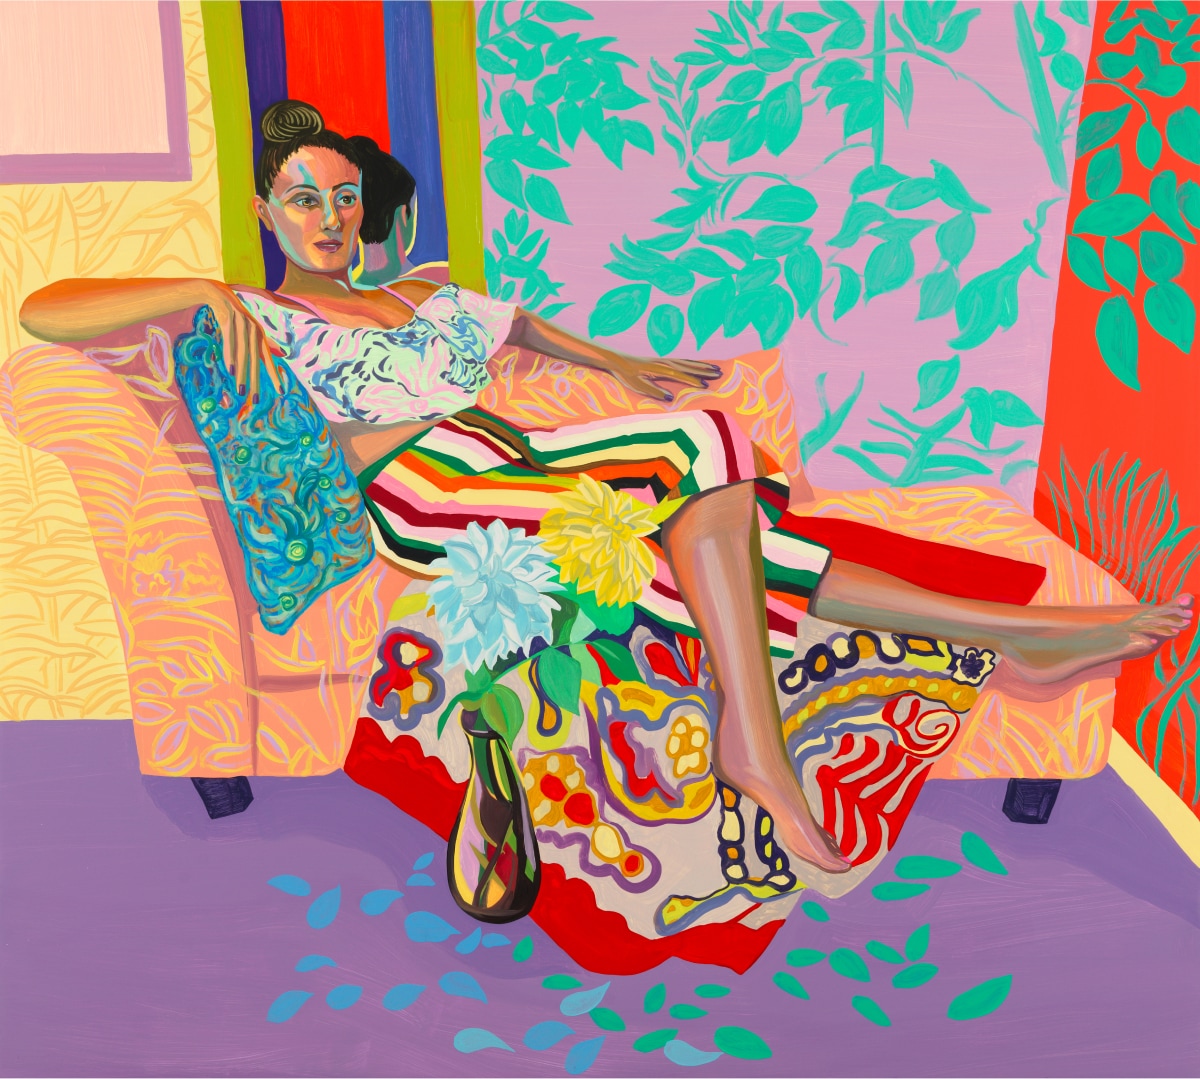 Nisenbaum’s “Tumbao de Omambo” featuring a woman reclined on a chaise lounge, surrounded by vibrant patterns and textiles